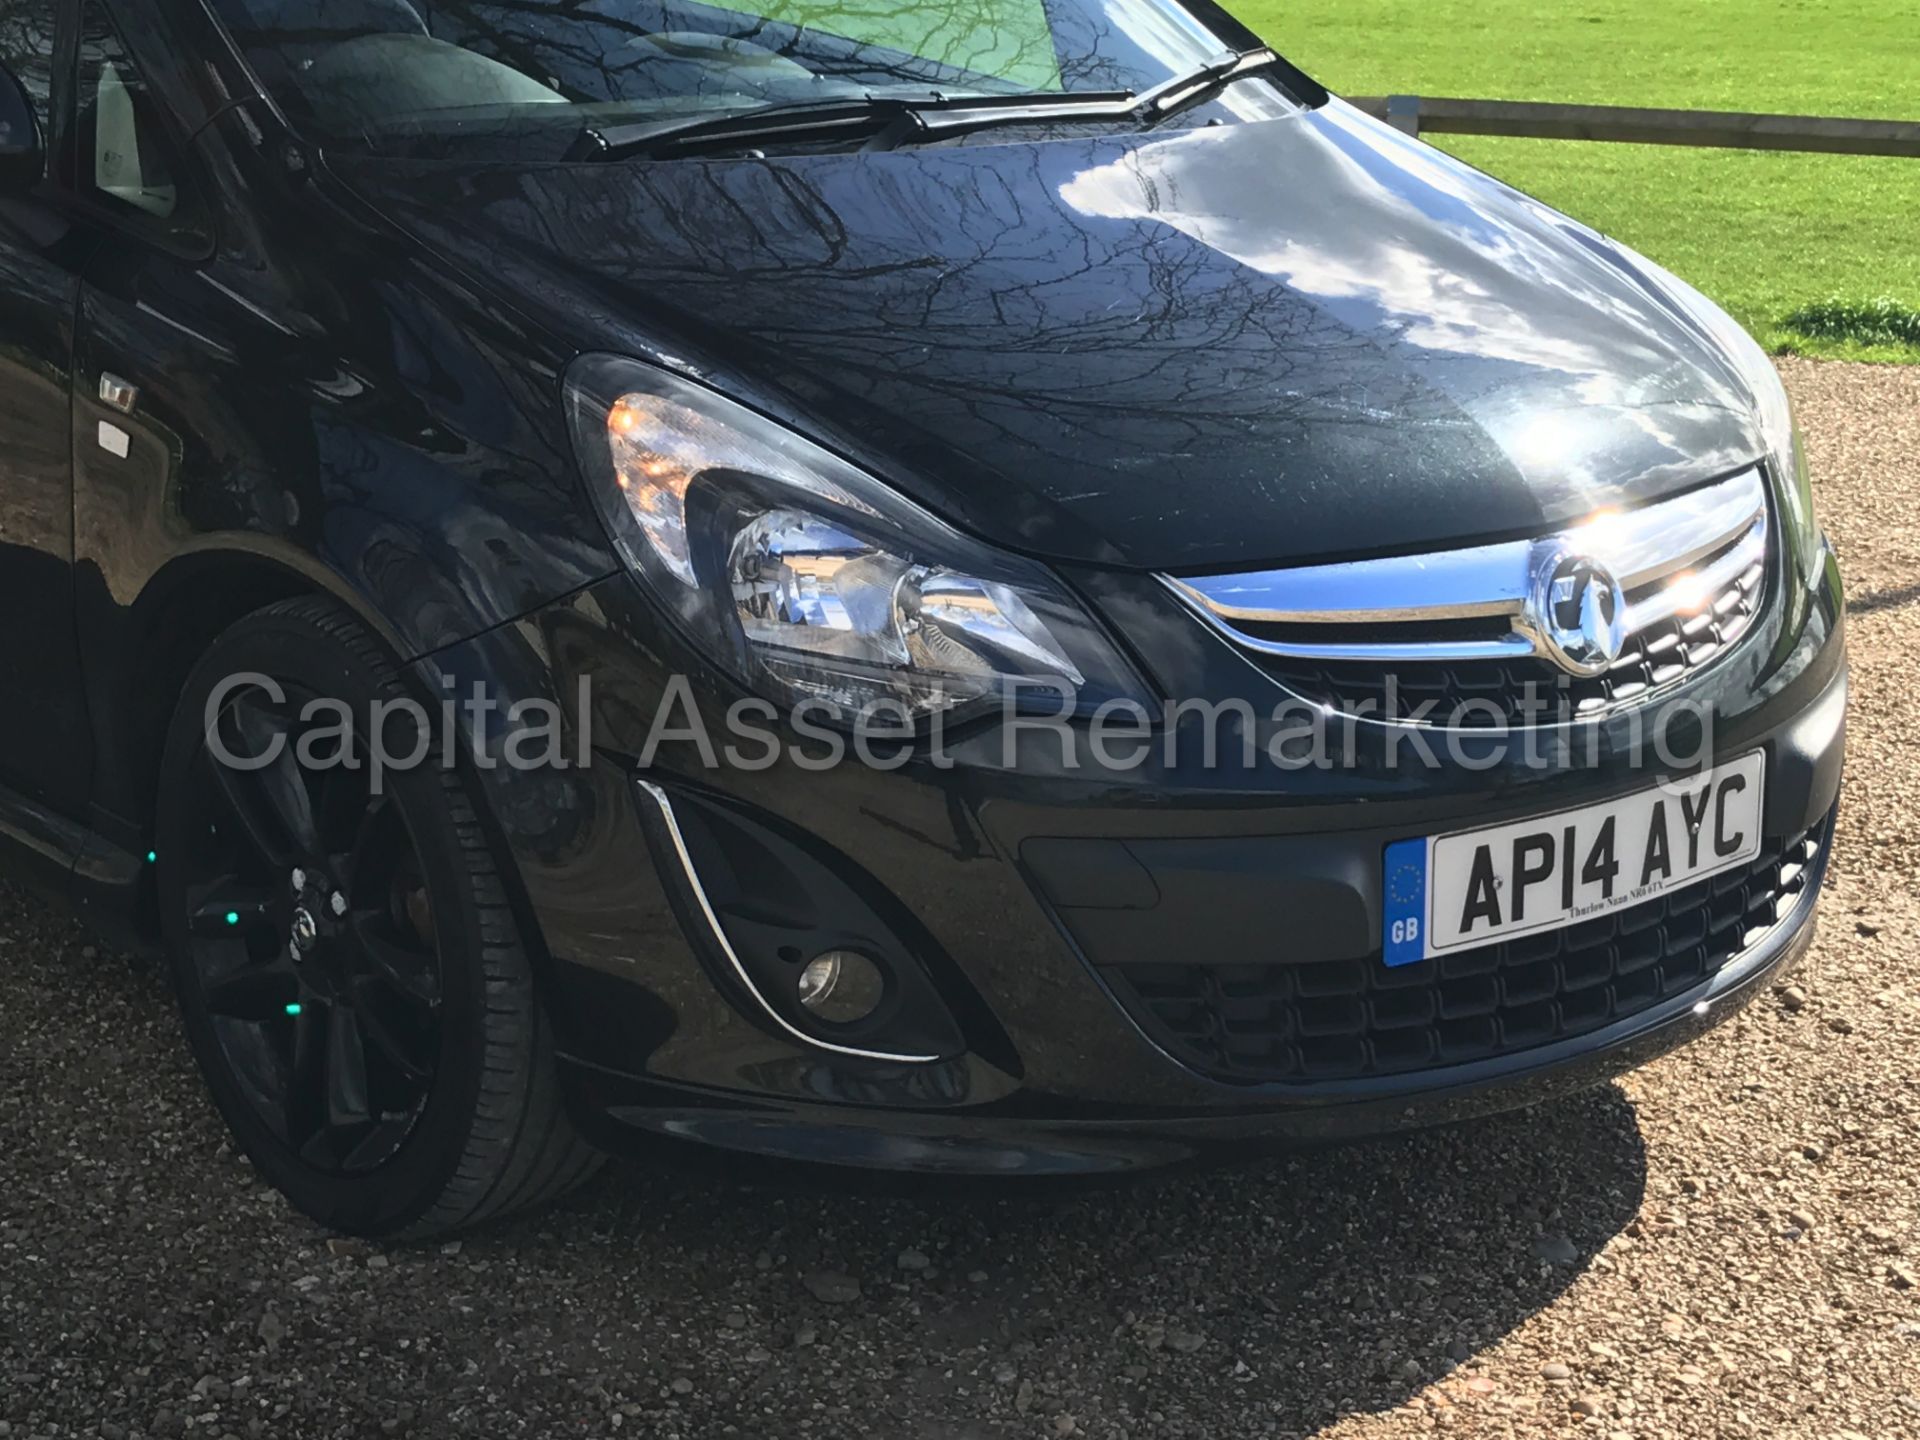 ON SALE VAUXHALL CORSA 'LIMITED EDITION' (2014) 'CDTI - 5 SPEED - AIR CON - ELEC PACK' (1 OWNER - Image 11 of 25